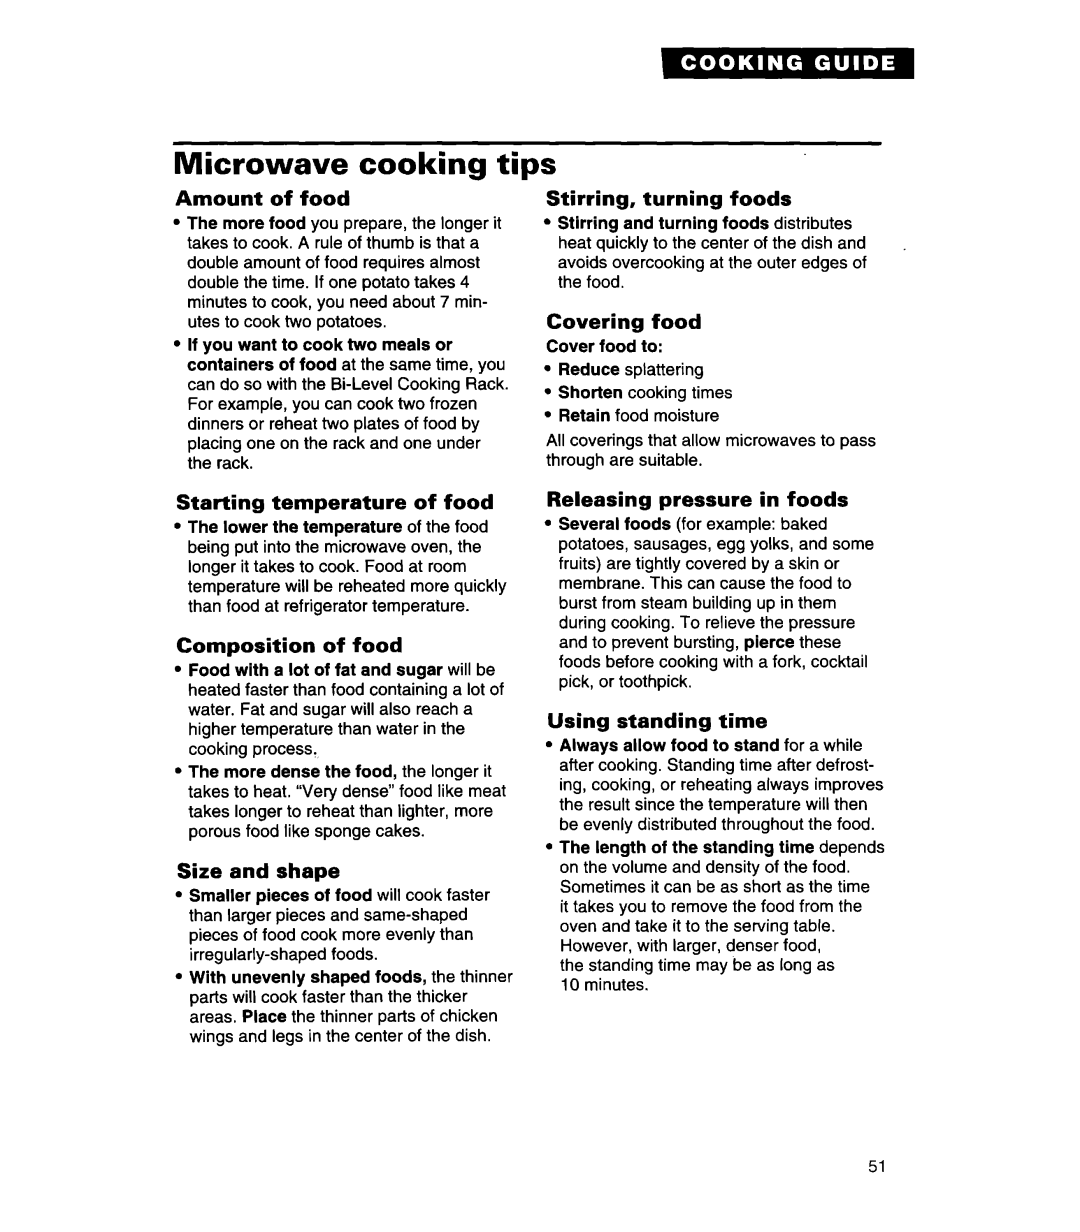 Whirlpool MH7130XE Microwave cooking tips, Amount of food, Stirring, turning foods, Covering food, Composition of food 